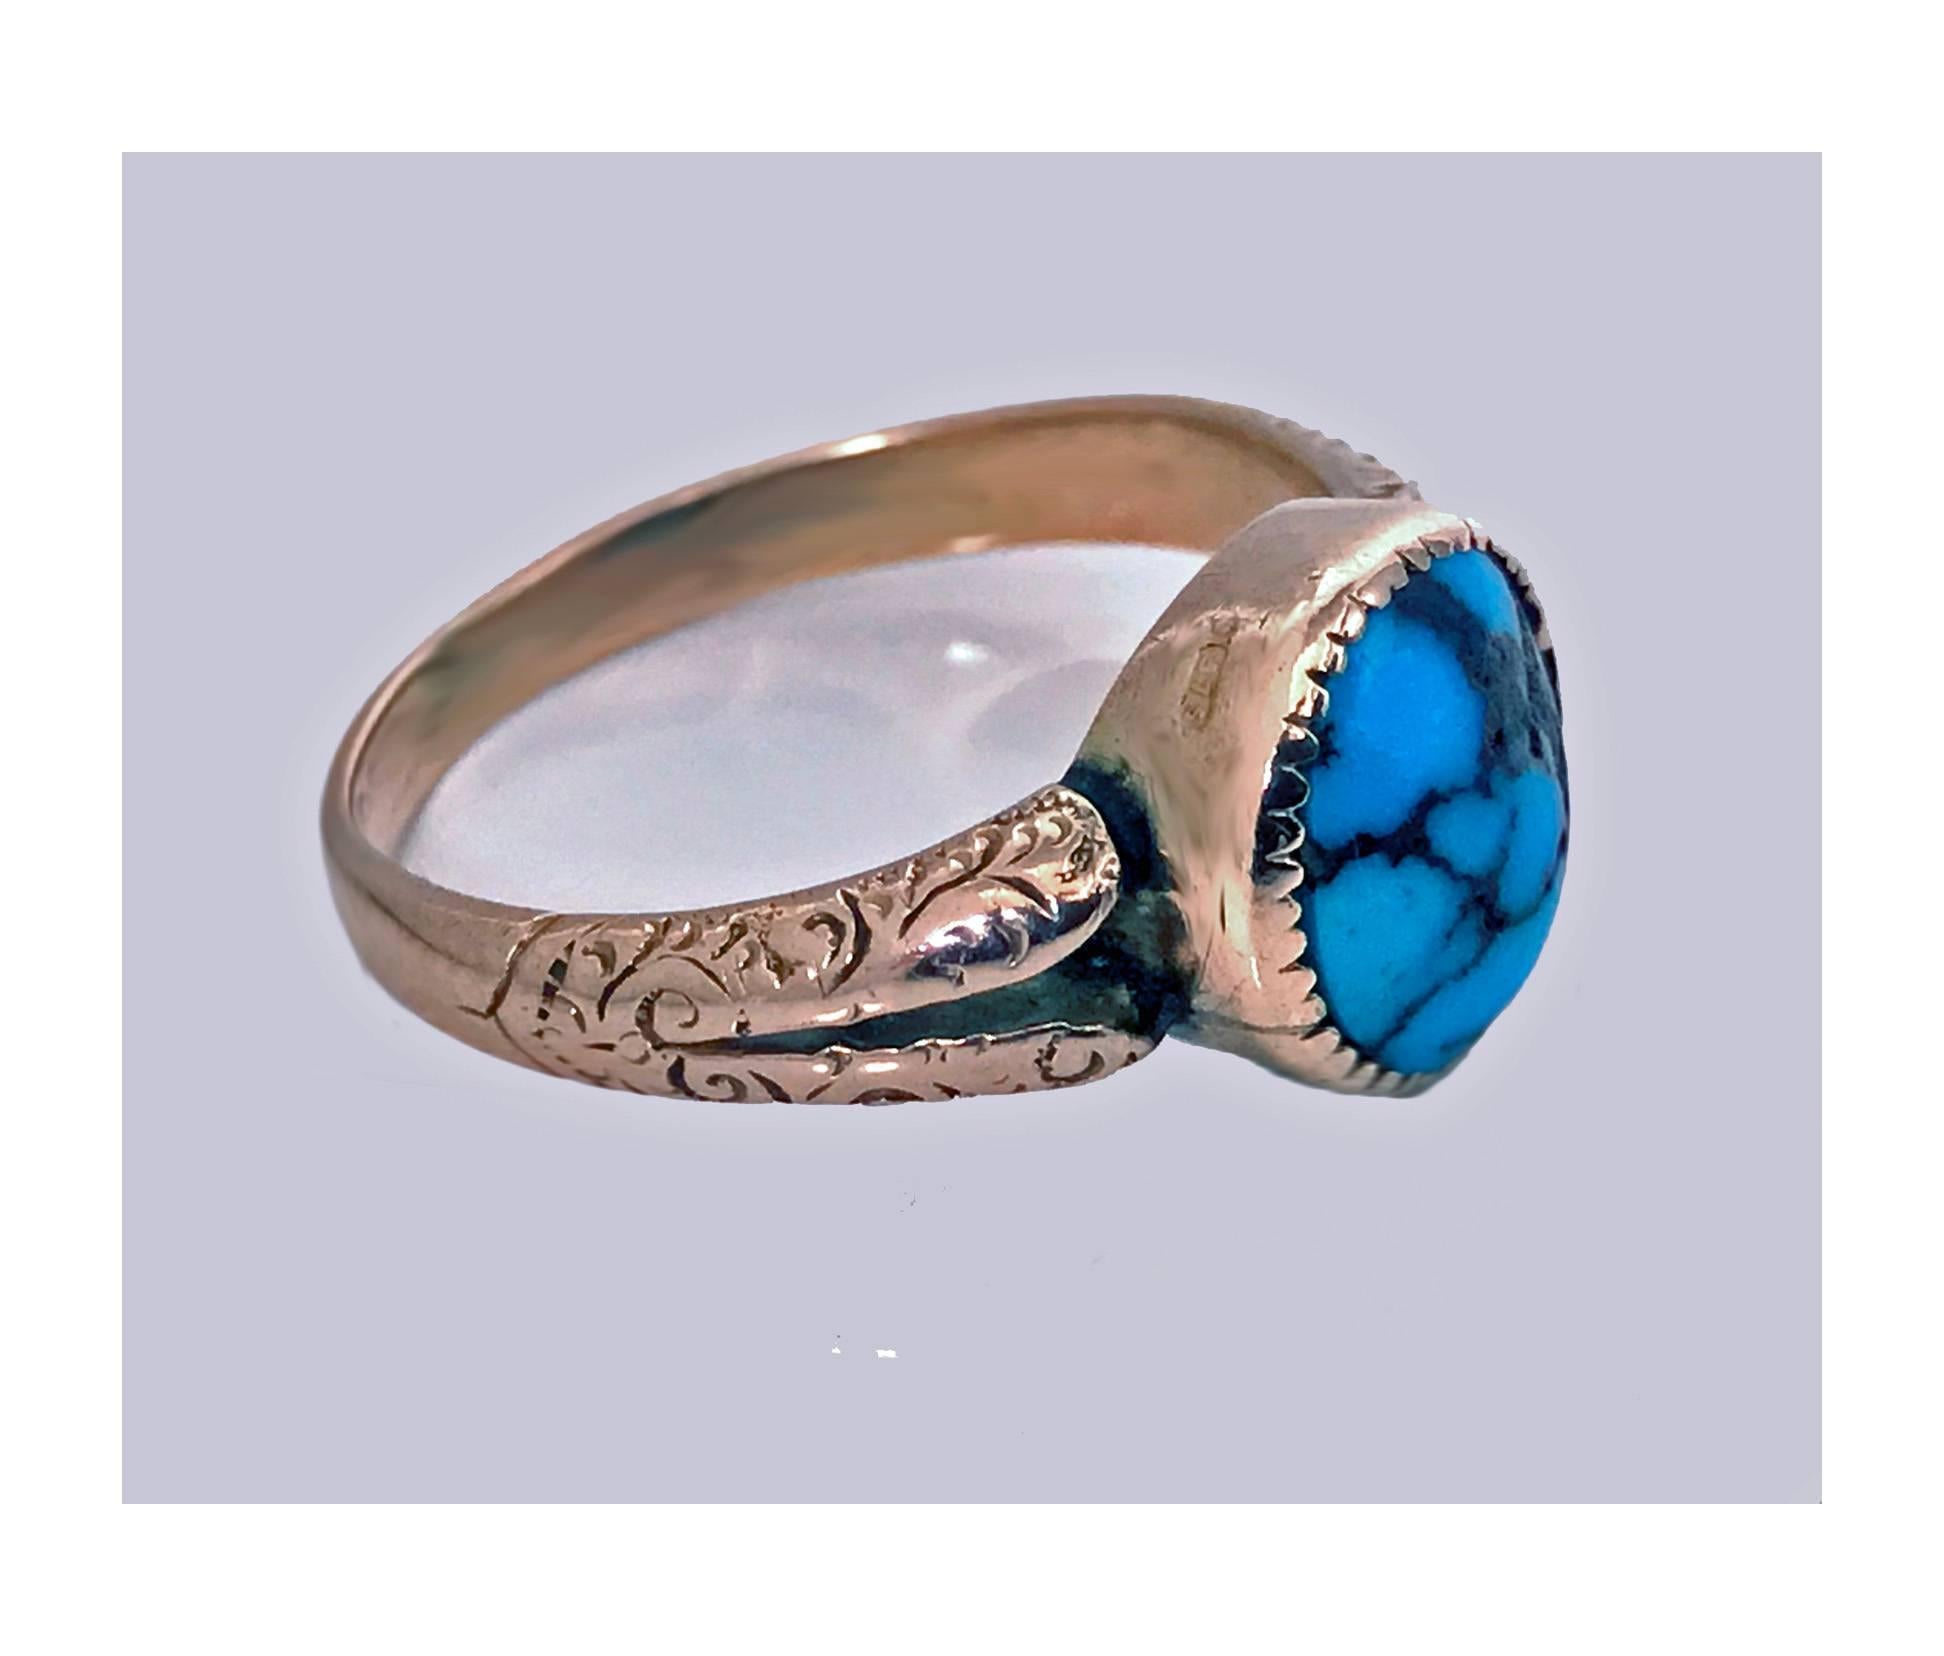 English Arts & Crafts Gold and Turquoise ring, Birmingham 1906. The ring set with a cabochon turquoise, deeply bezel set, split design foliate engraved shoulders, plain shank, hallmarked on interior for 0.375 (9K) and Birmingham 1906. Total item